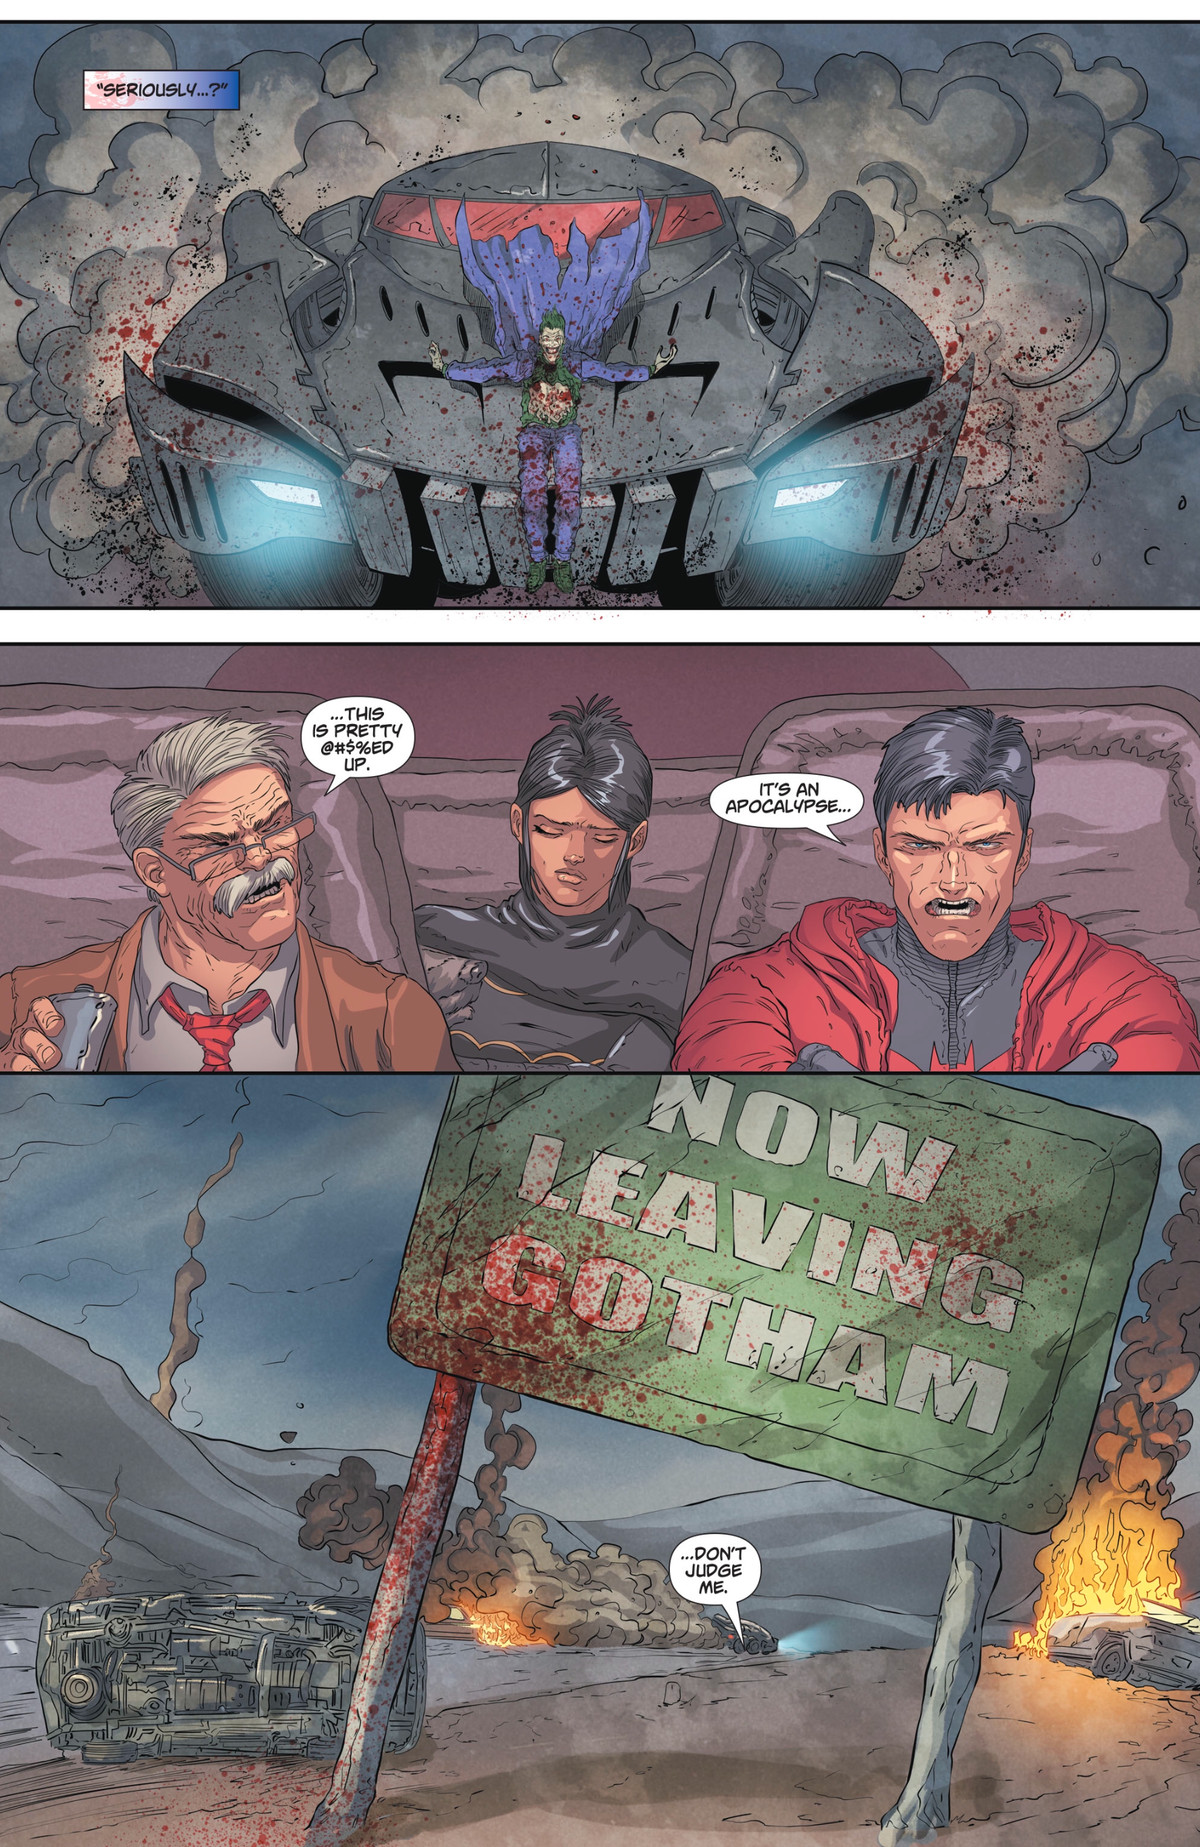 “This is pretty fucked up,” Commissioner Gordon says to Jason Todd, about how he tied the Joker’s dead body to the front of the batmobile. “It’s an apocalypse, don’t judge me,” Jason replies, in DCeased: The Unkillables #1, DC Comics (2020). 